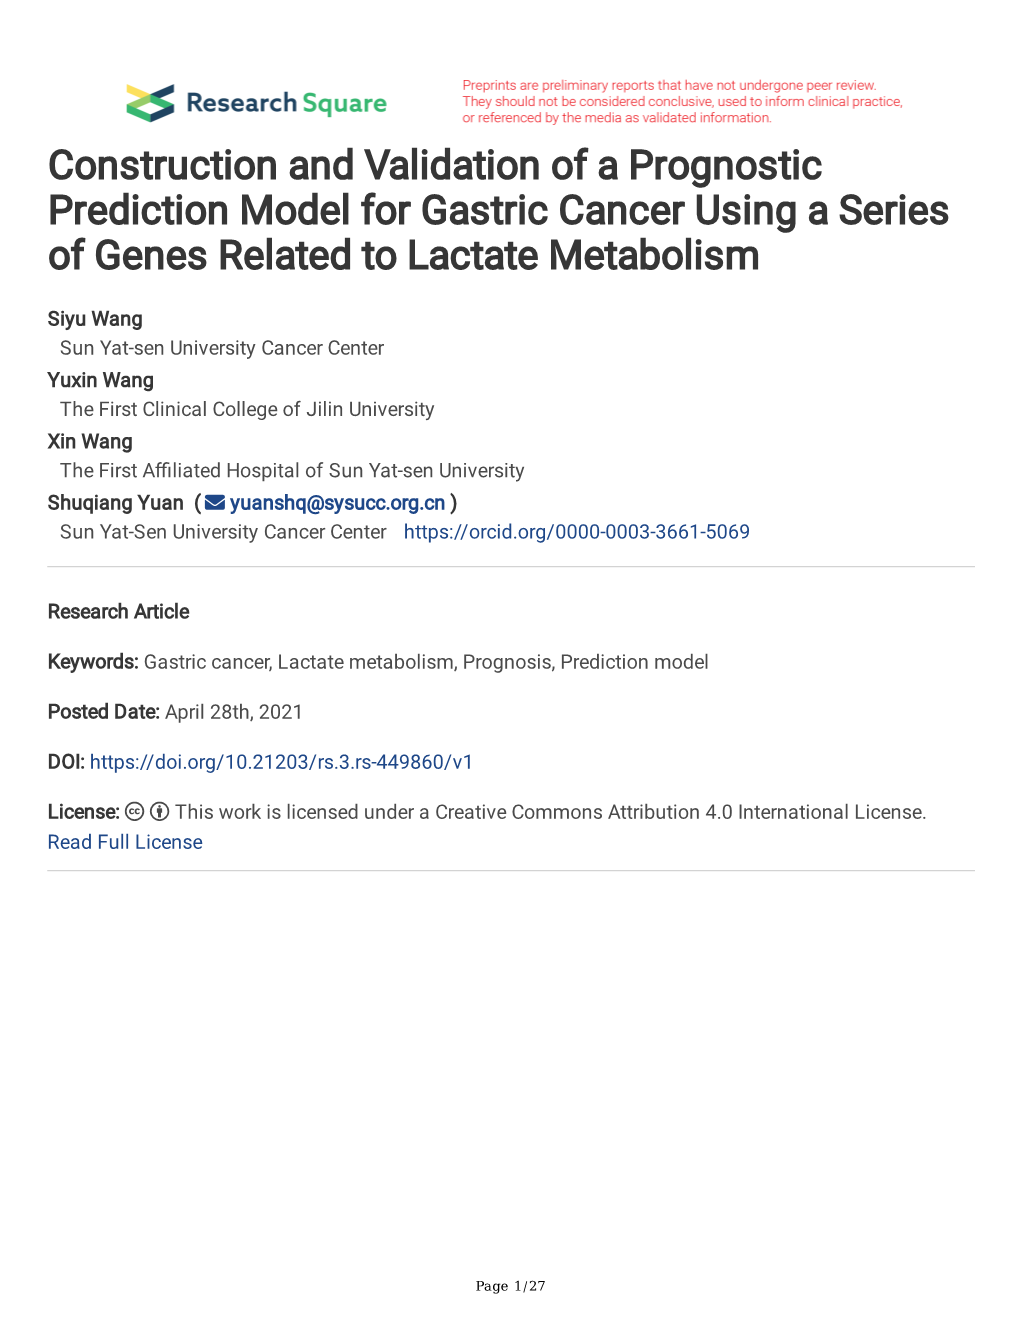 Construction and Validation of a Prognostic Prediction Model for Gastric Cancer Using a Series of Genes Related to Lactate Metabolism